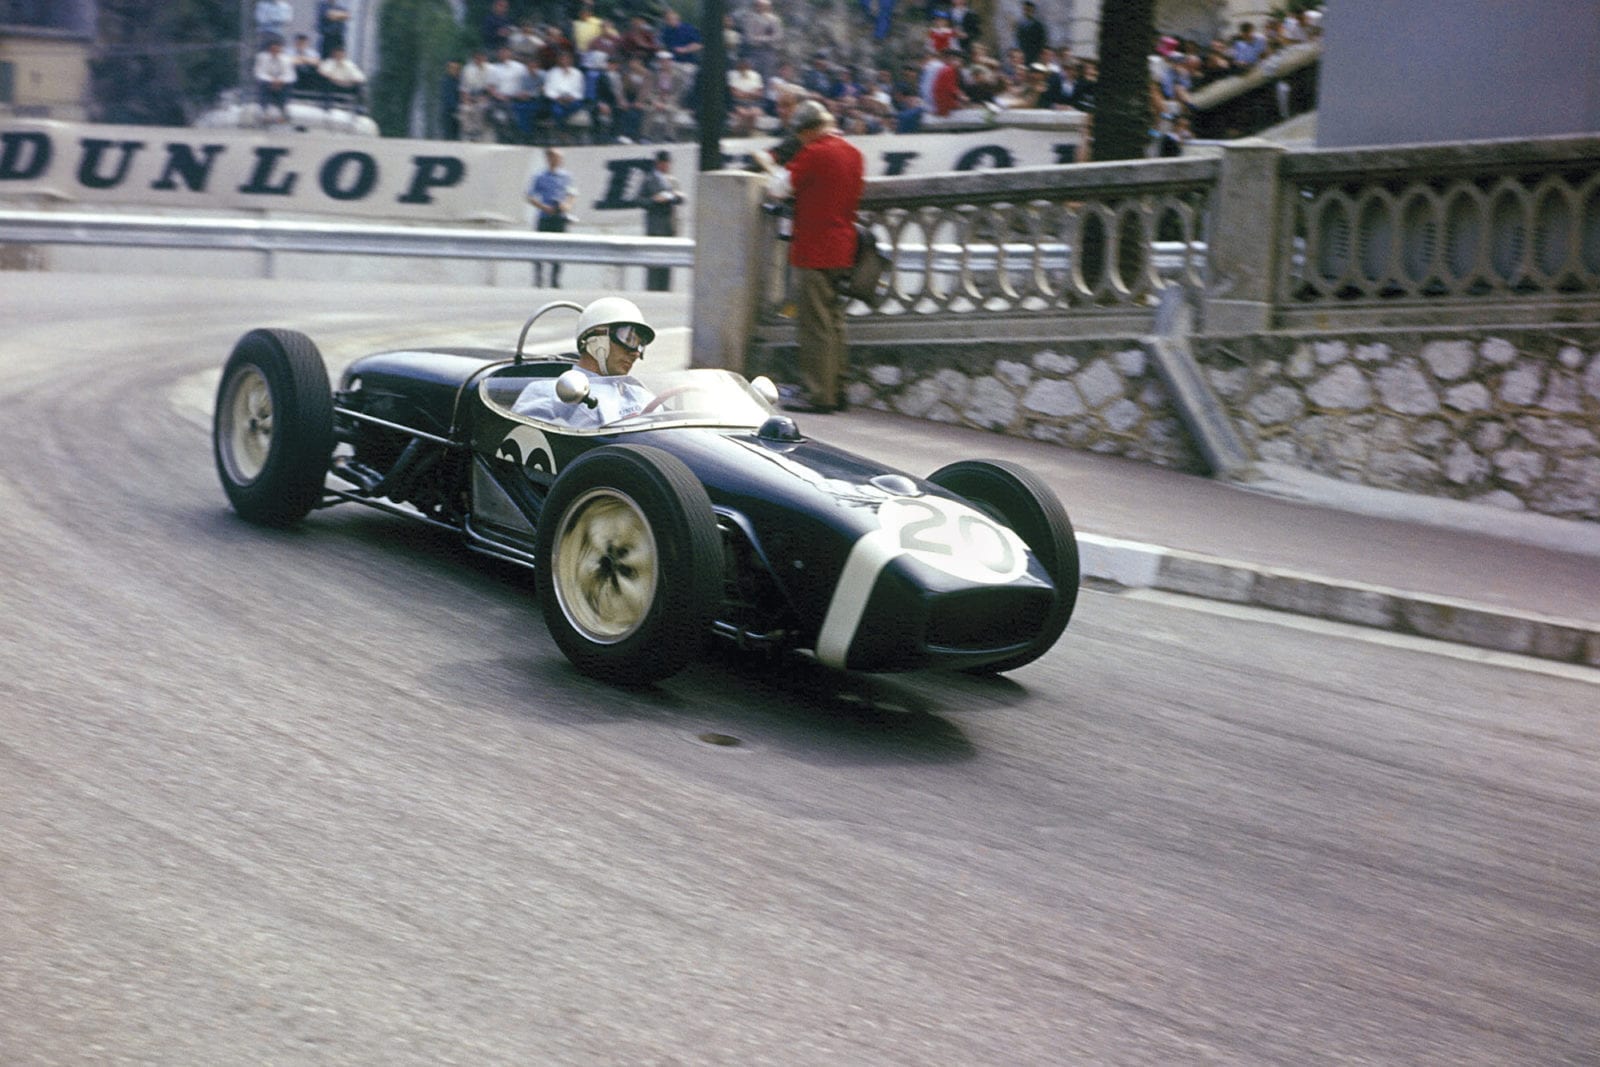 Stirling Moss powers away from the hairpin in the 1961 Monaco Grand Prix